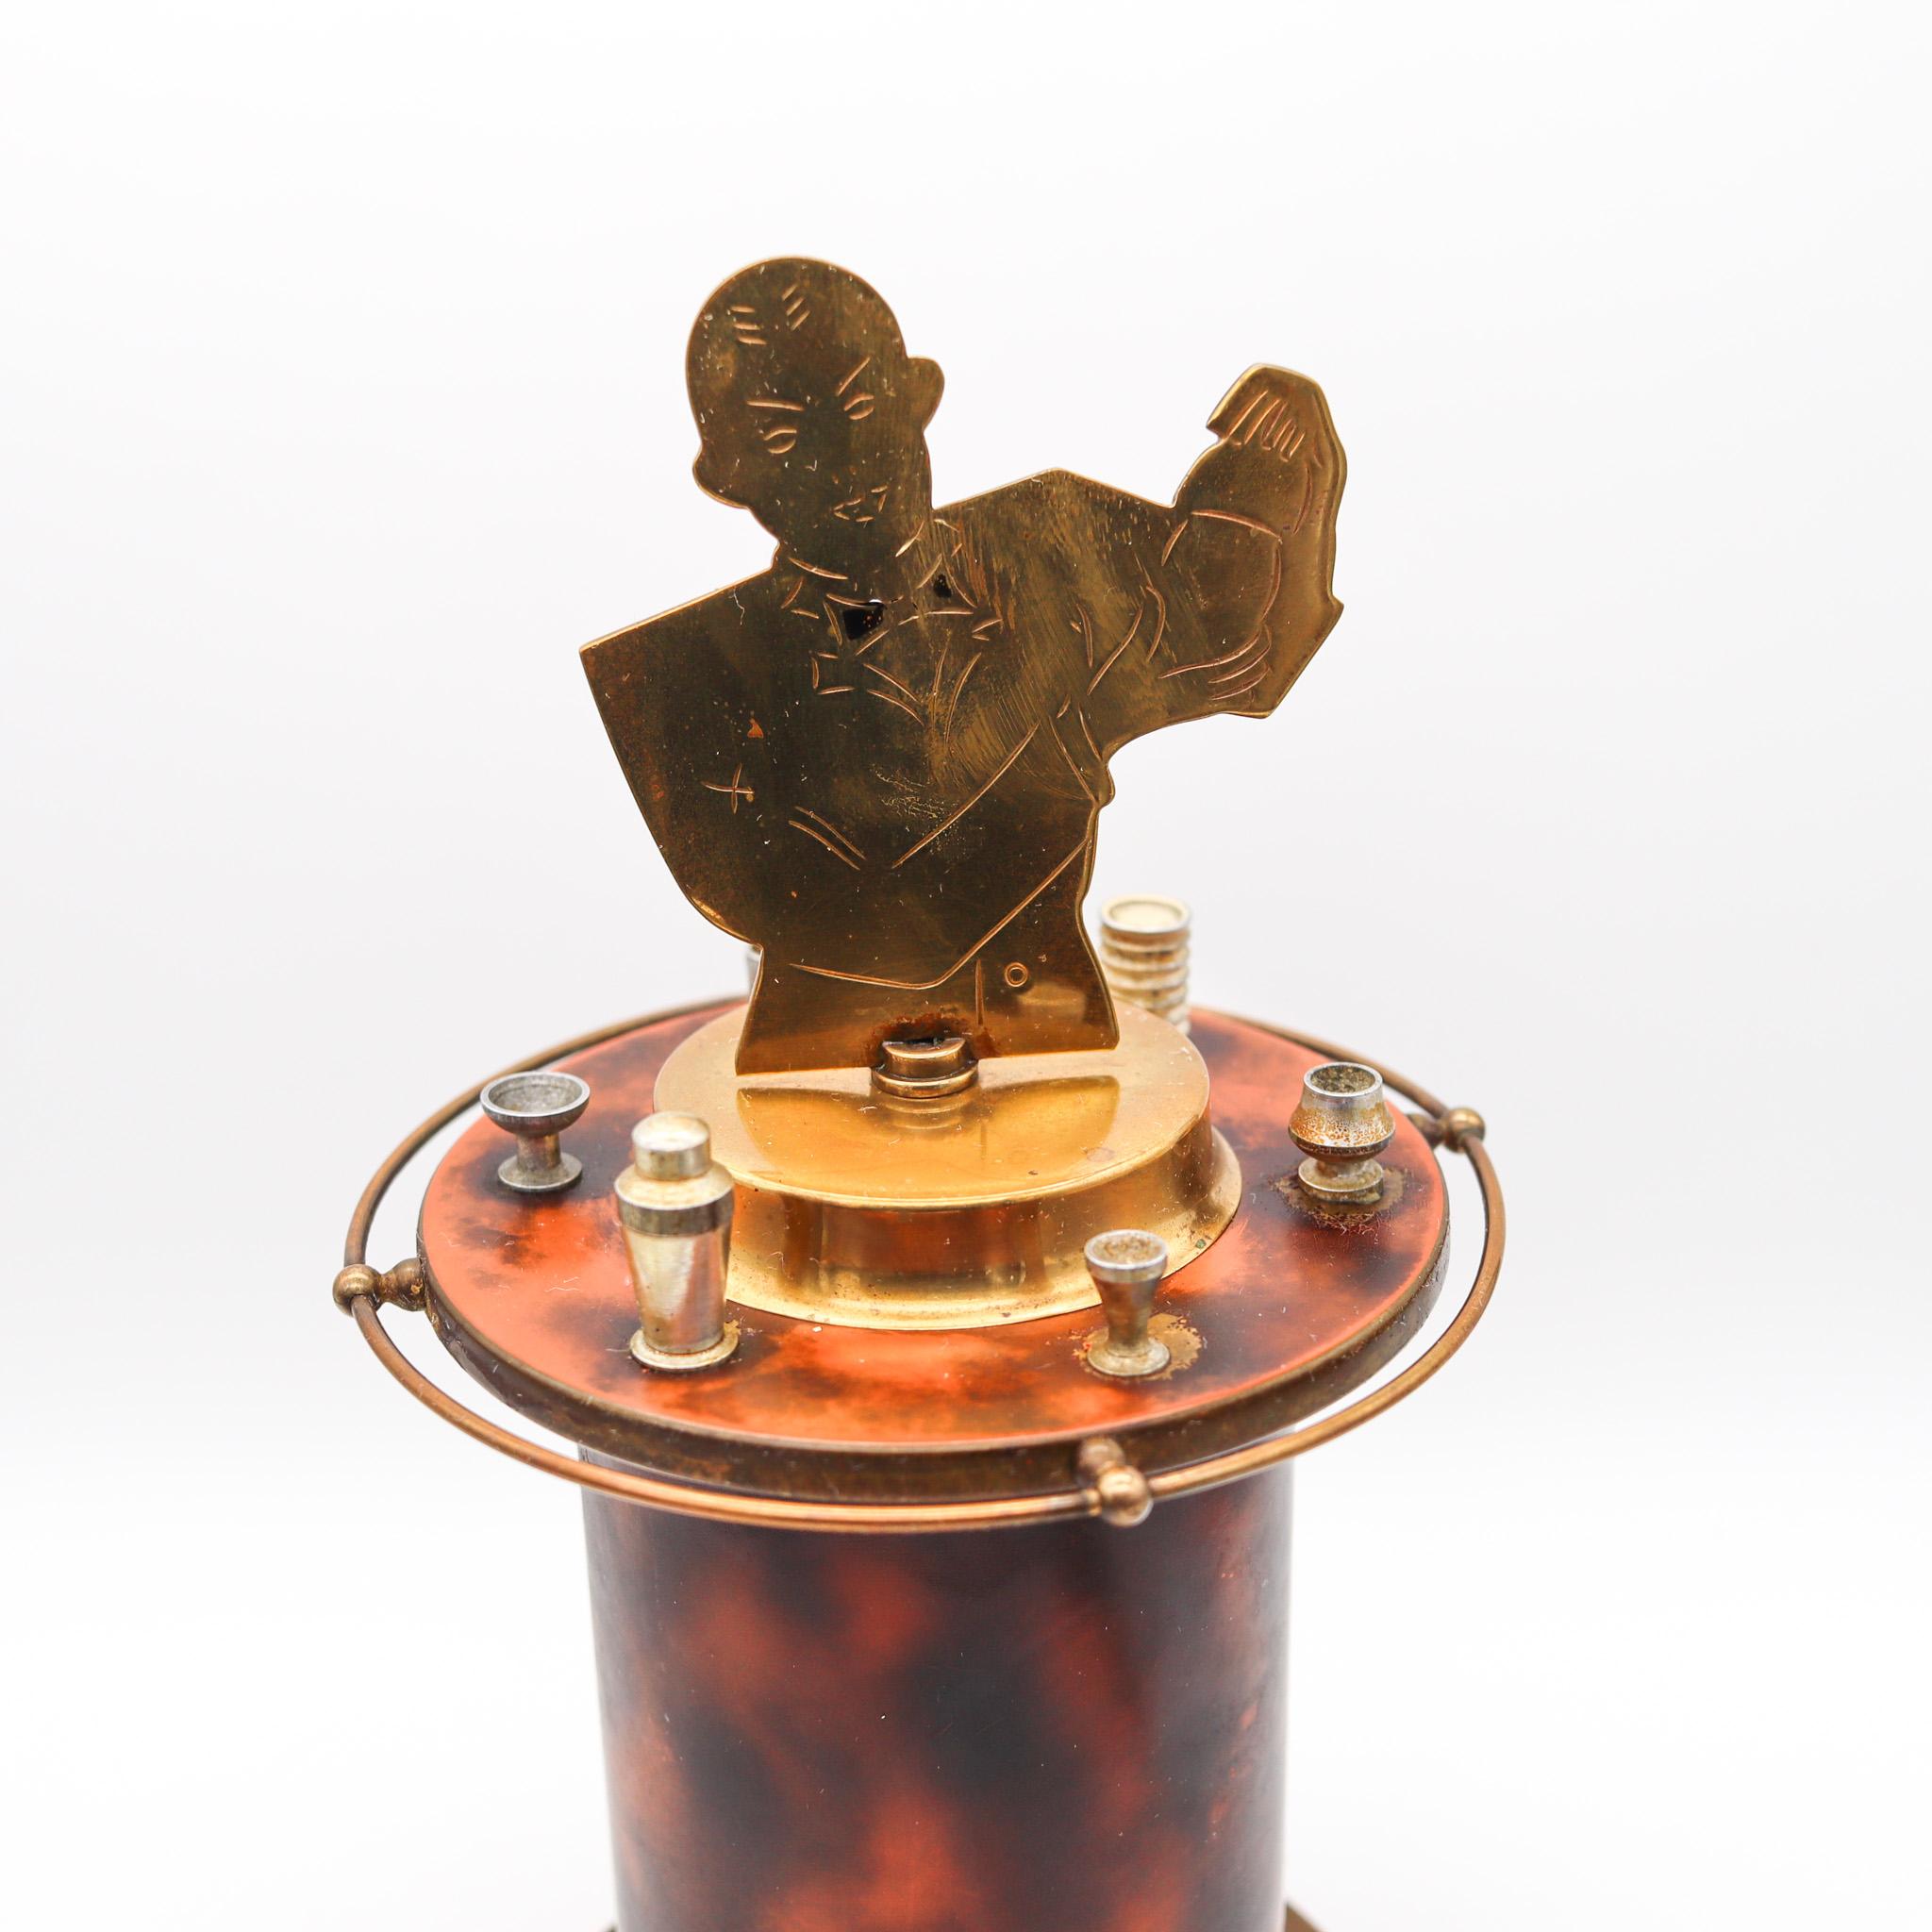 Barman mechanical cigarette dispenser box.

An exceptional and very beautiful desk piece, created in Germany during the art deco period, back in the 1935. This is a rare barman mechanical cigarettes dispenser box with 25 movable elements to fit the